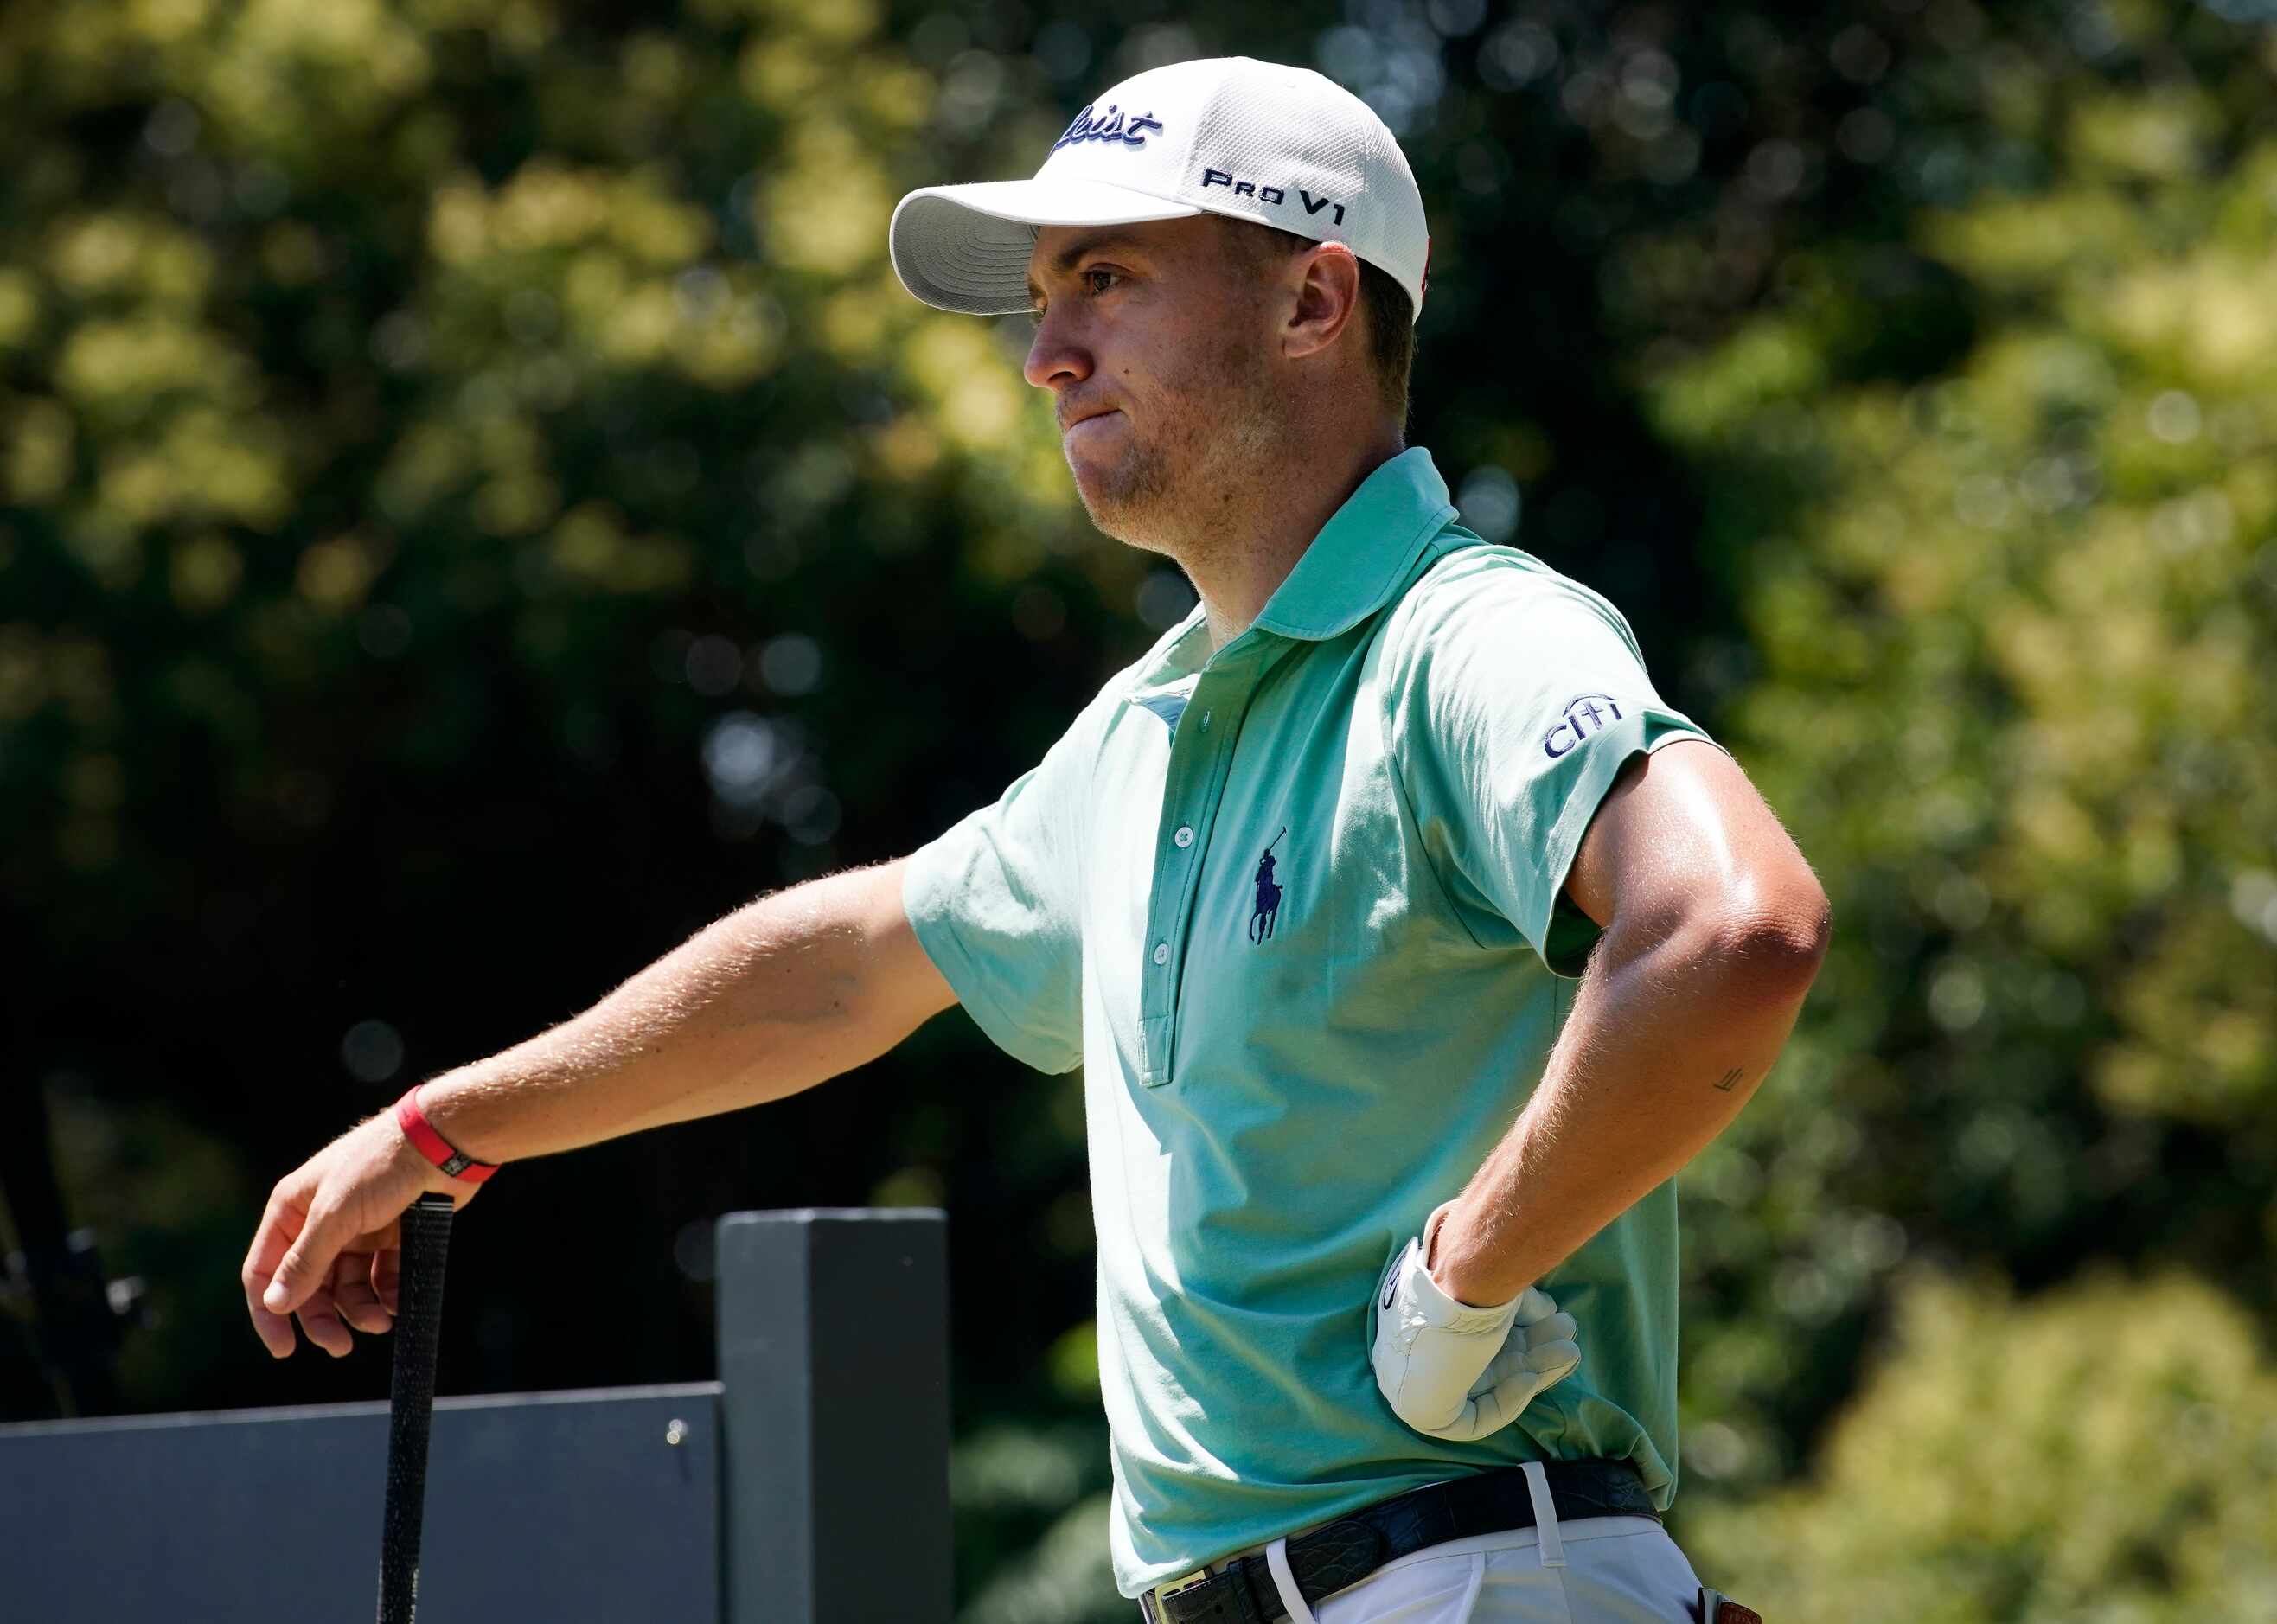 PGA Tour golfer Justin Thomas wasn't happy with his drive on No. 9 during the final round of...